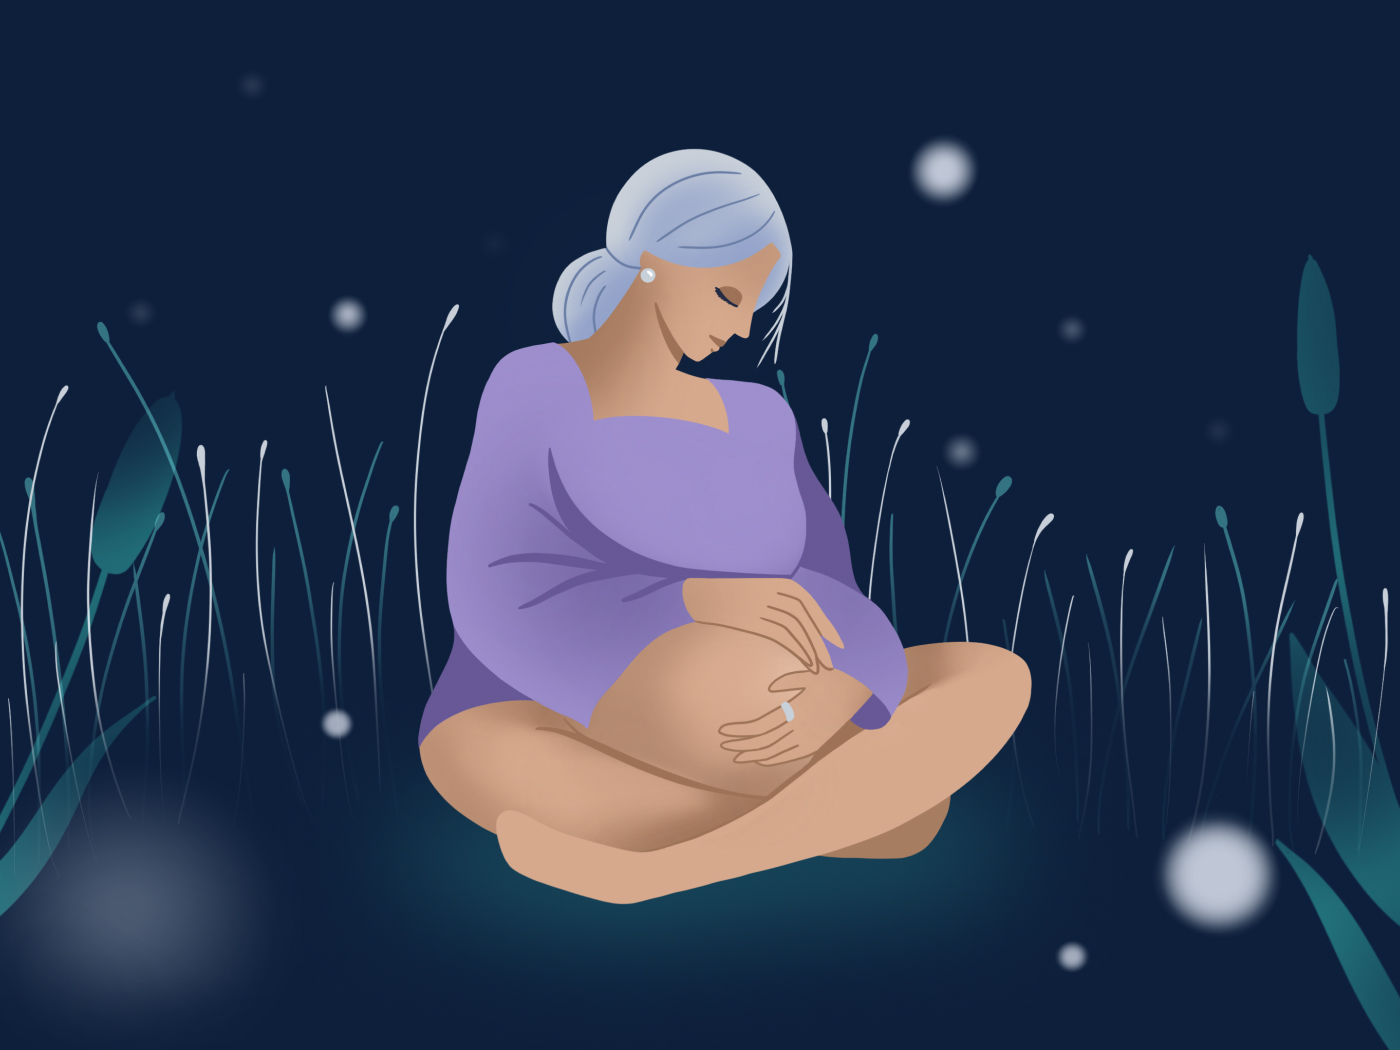 Oura's Pregnancy Insights Illustration